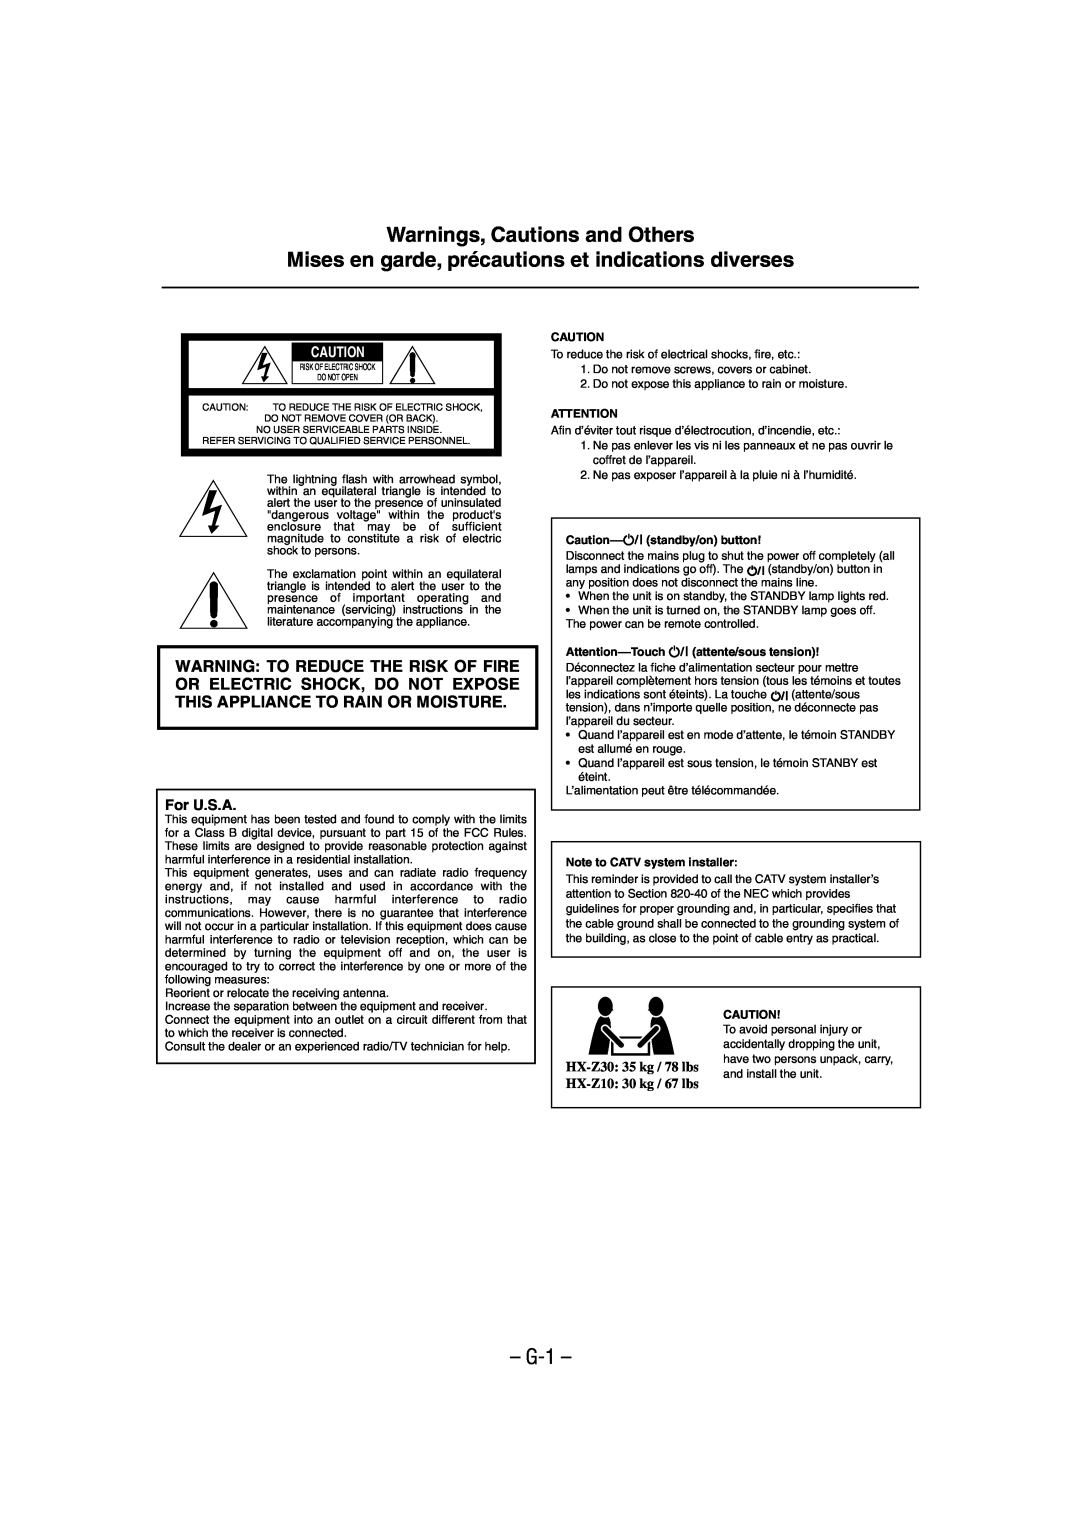 JVC HX-Z10 manual Warnings, Cautions and Others, G-1, For U.S.A, Caution--standby/on button, Note to CATV system installer 